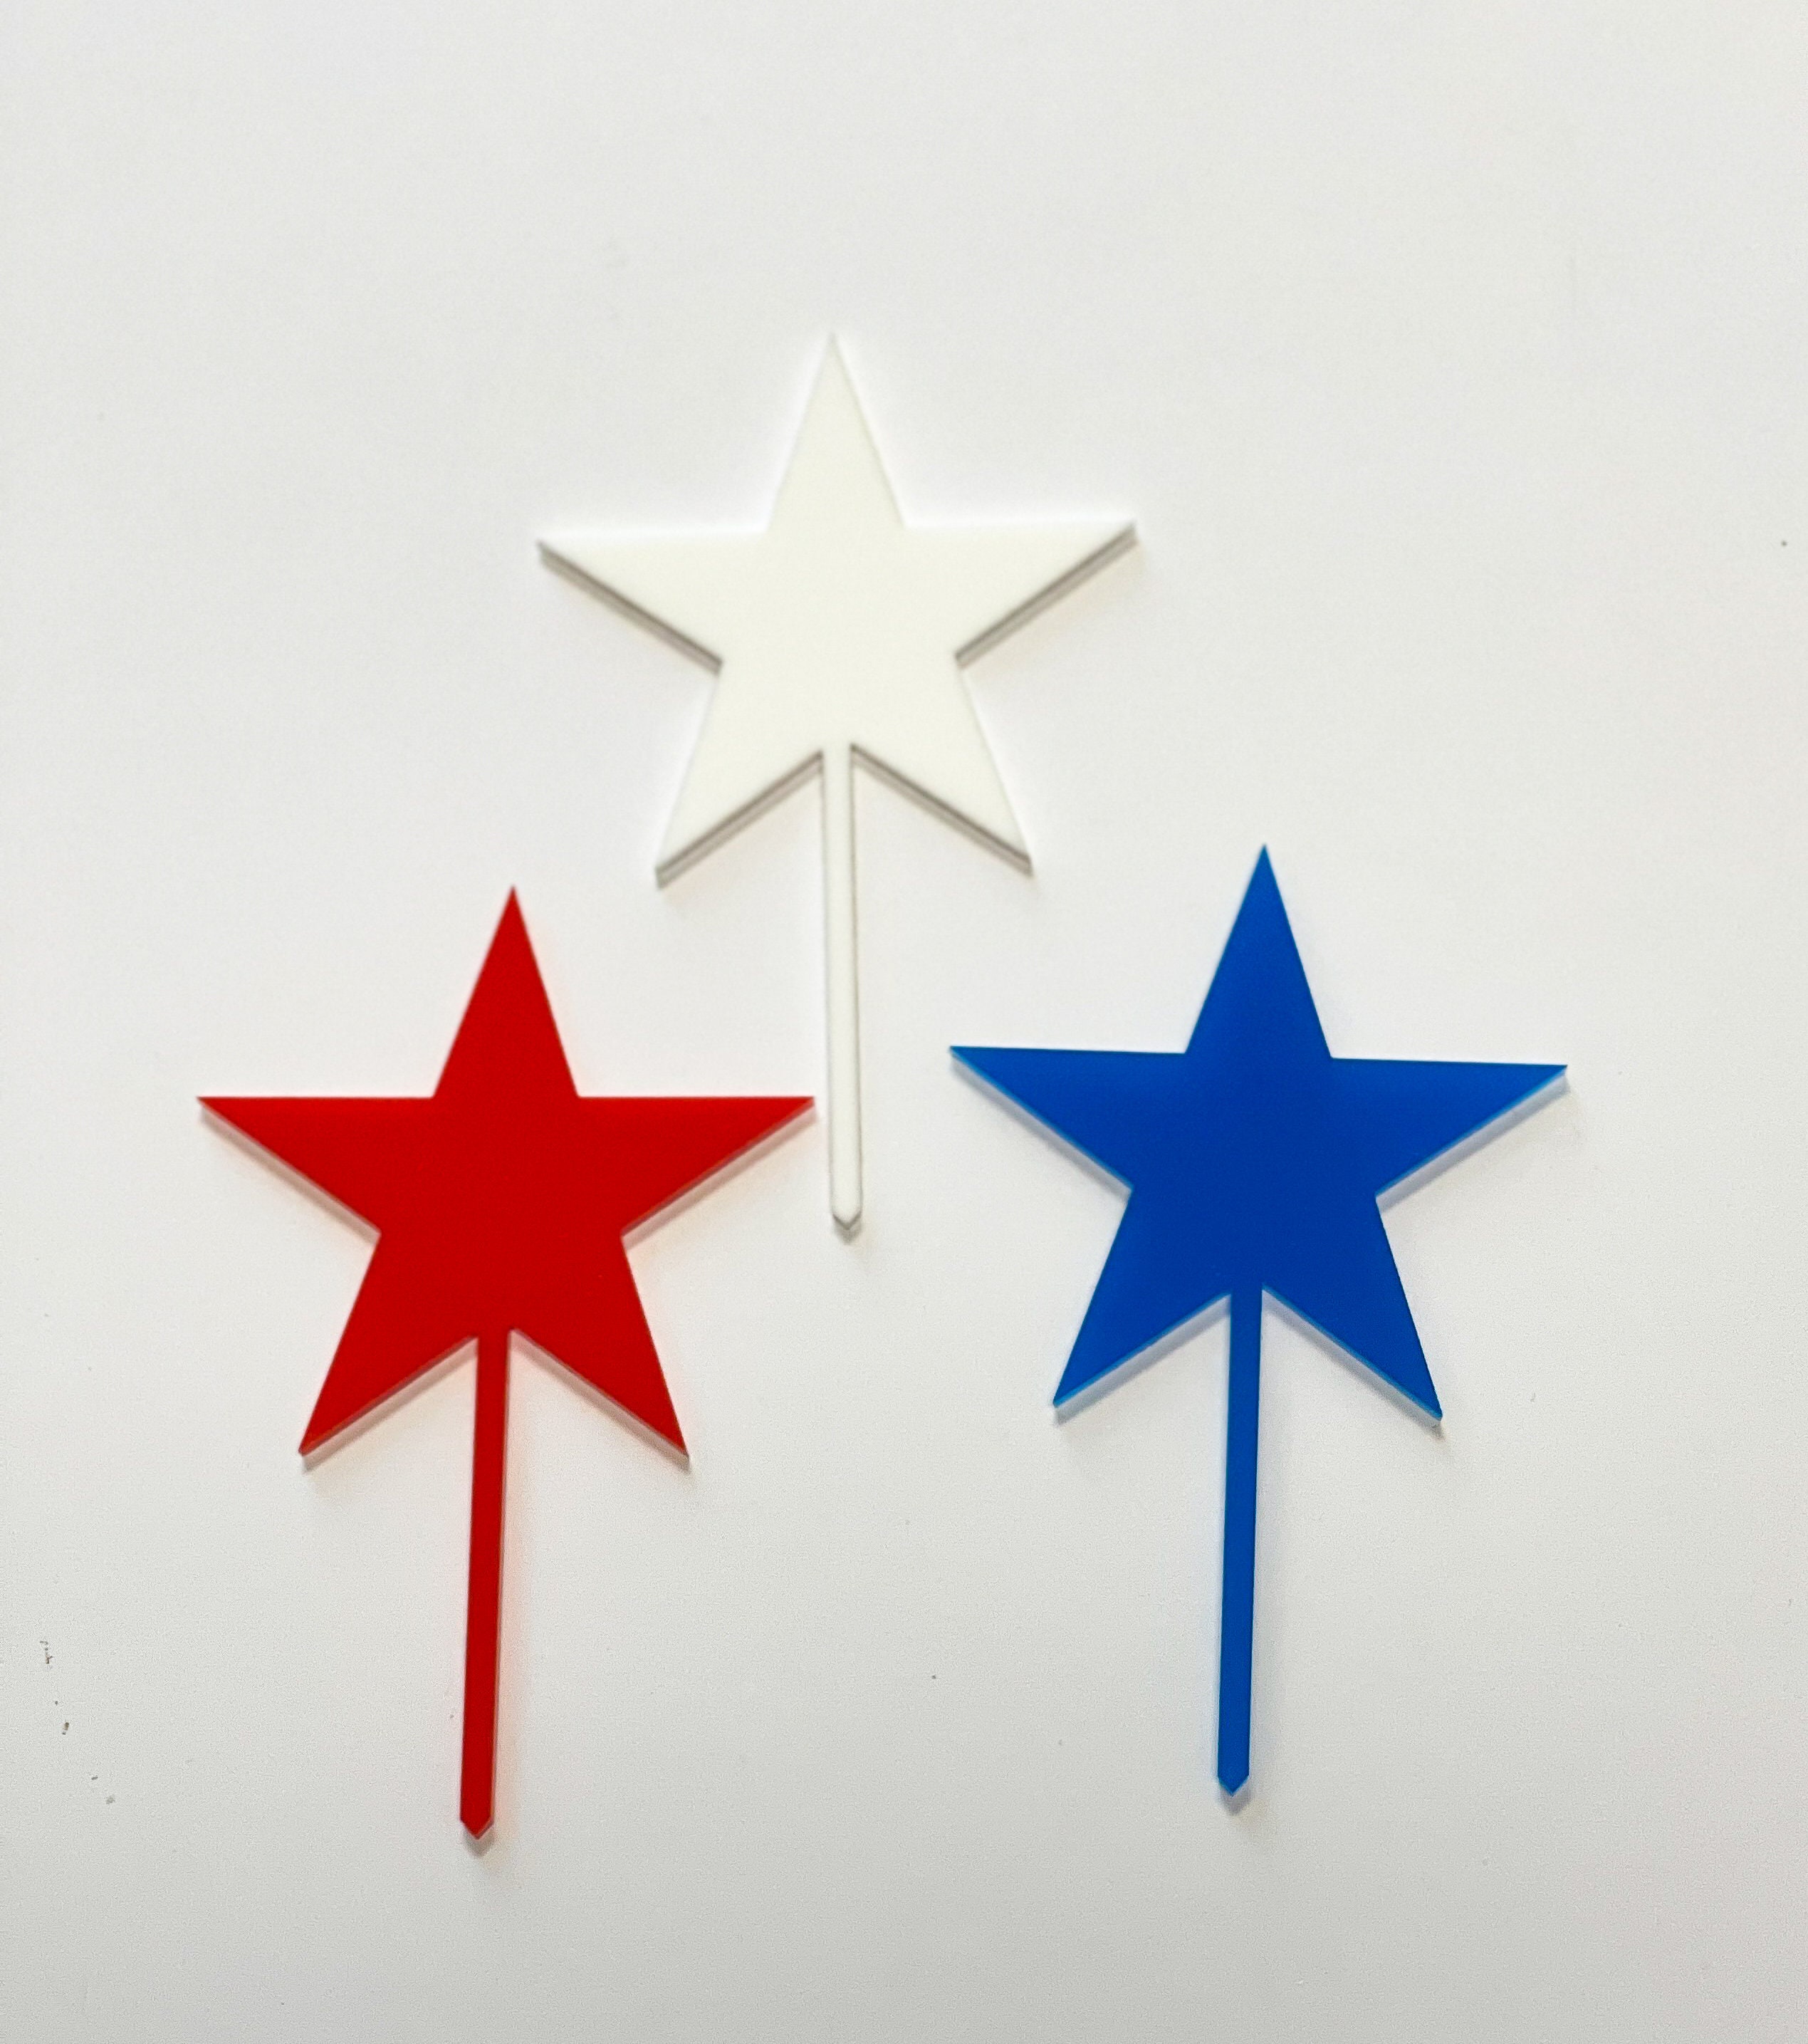 4th of july cake toppers red white & blue usa cupcake topper acrylic cake toppers acrylic toppers 4th of july cupcake toppers